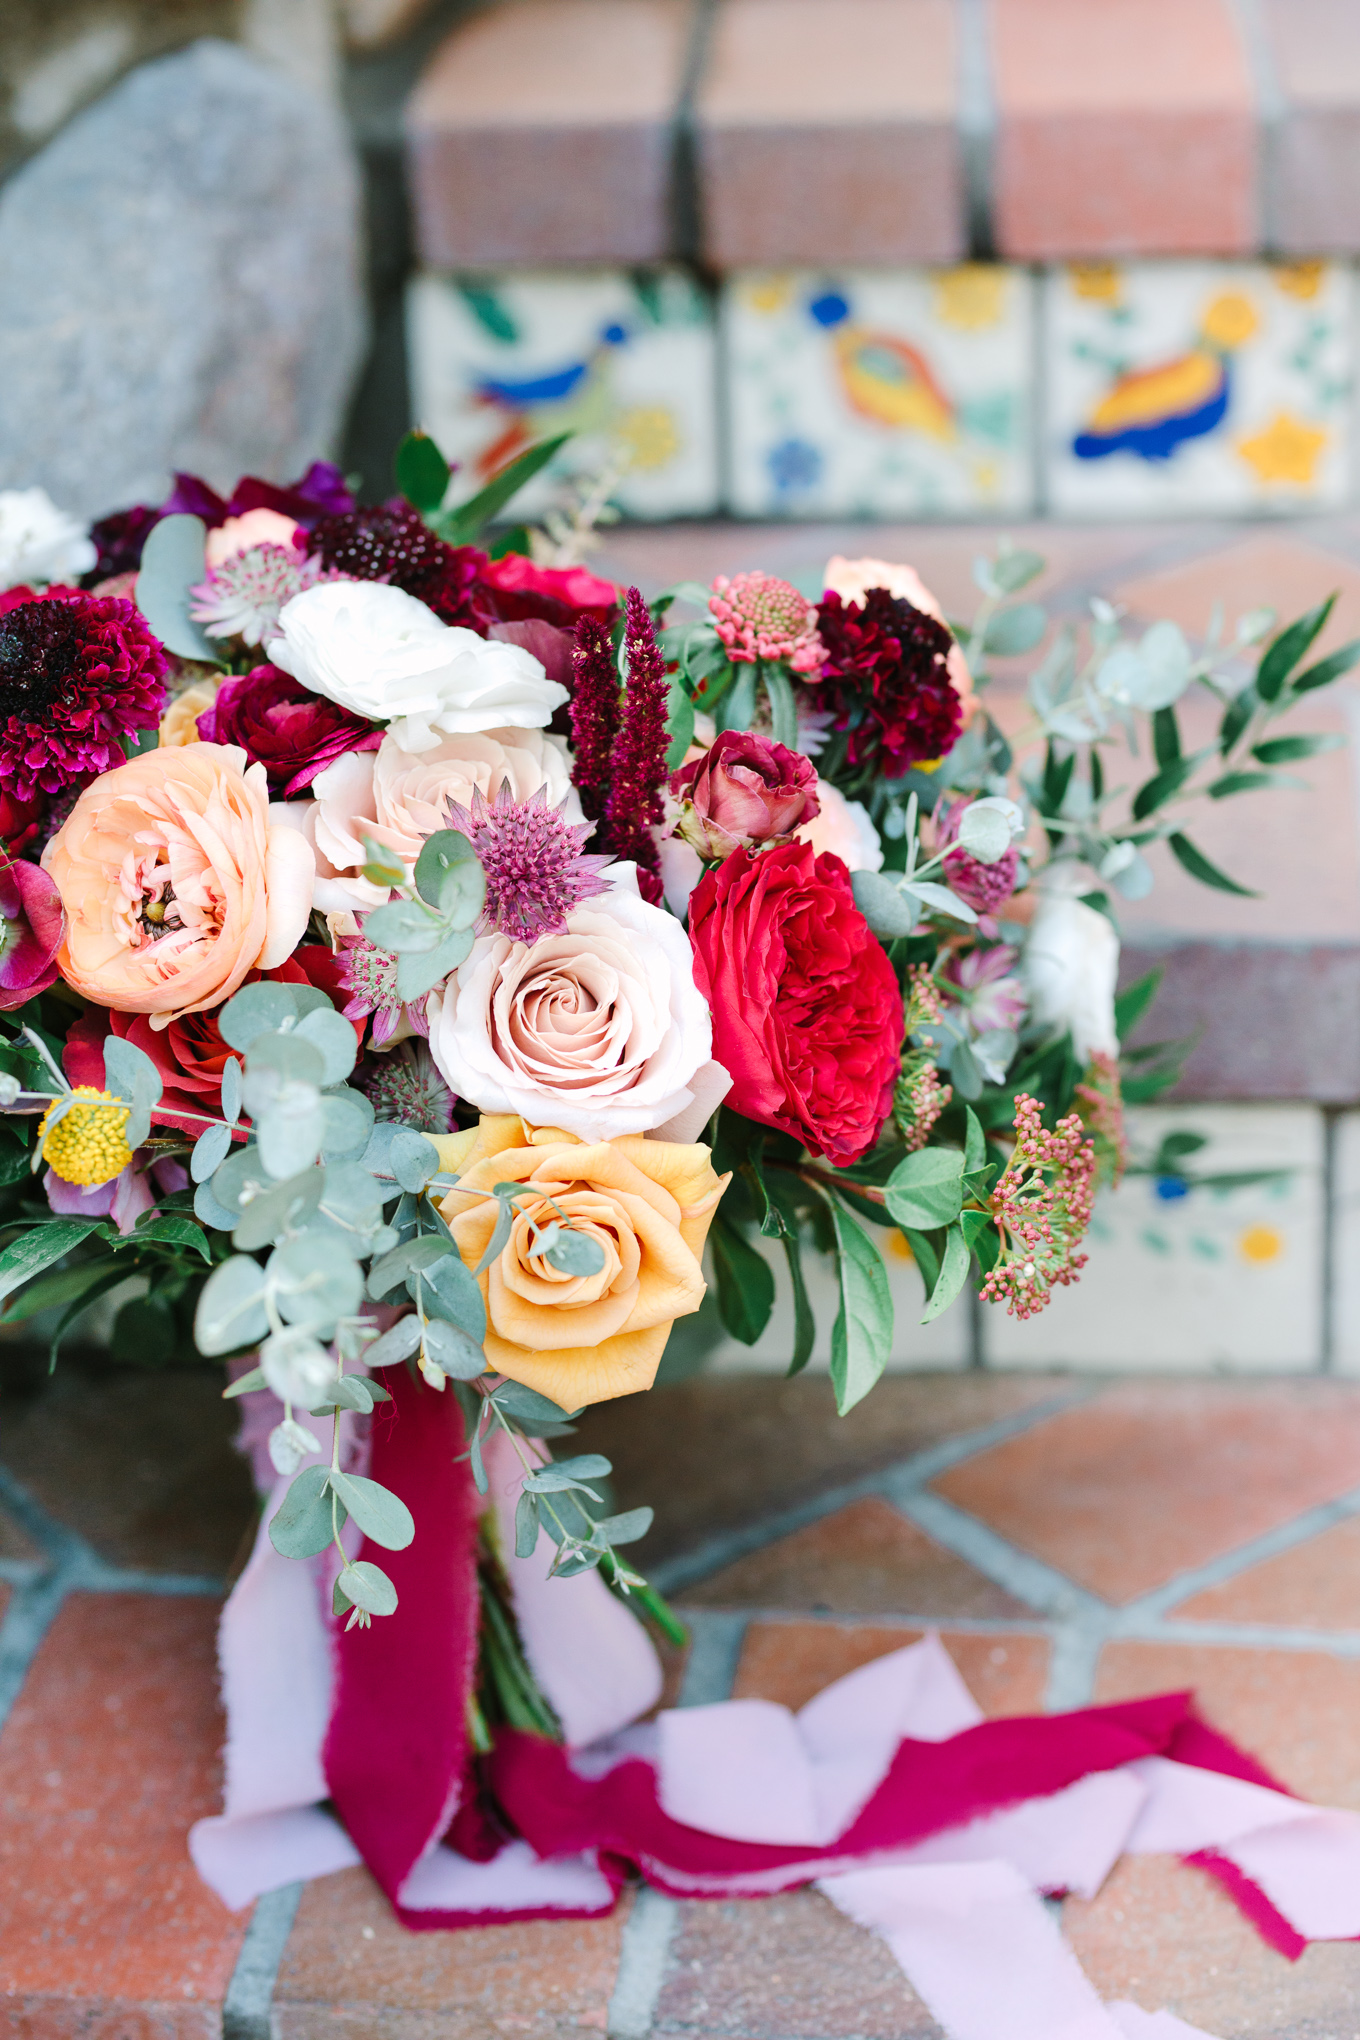 Winter red organic wedding flowers | Beautiful bridal bouquet inspiration and advice | Colorful and elevated wedding photography for fun-loving couples in Southern California | #weddingflowers #weddingbouquet #bridebouquet #bouquetideas #uniquebouquet   Source: Mary Costa Photography | Los Angeles